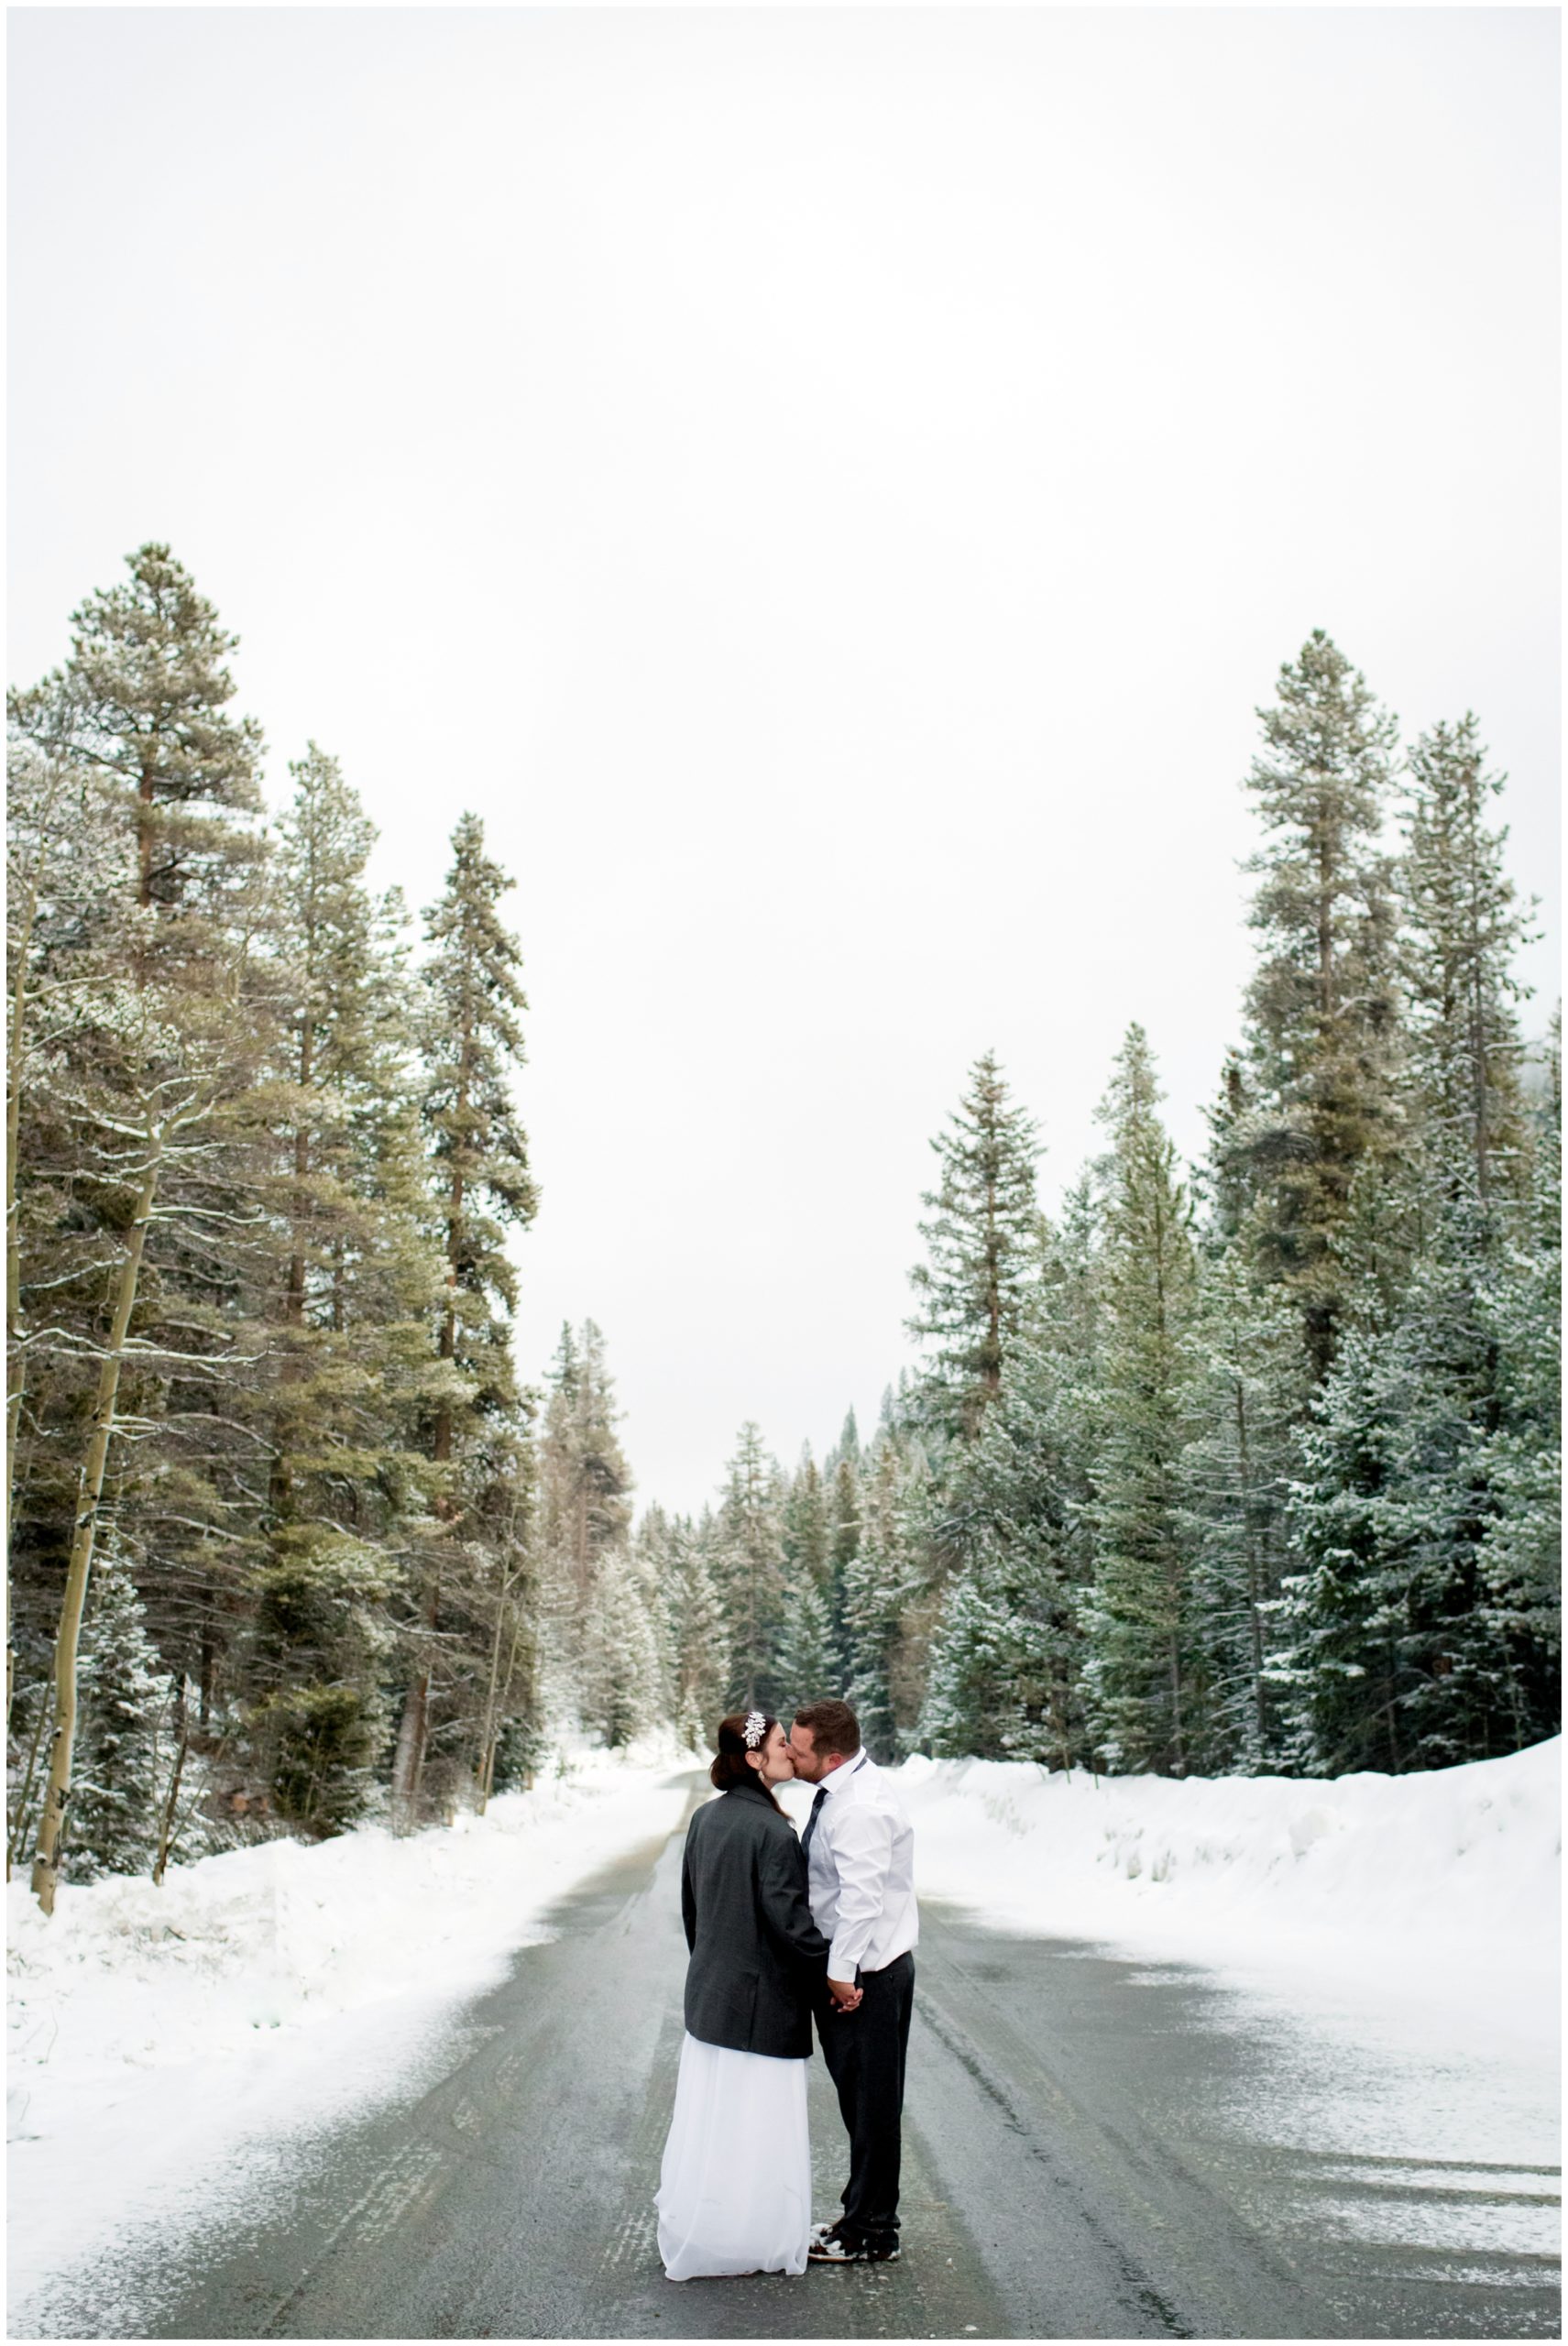 Snowy Colorado winter elopement in Idaho Springs by mountain wedding photographer Plum Pretty Photography